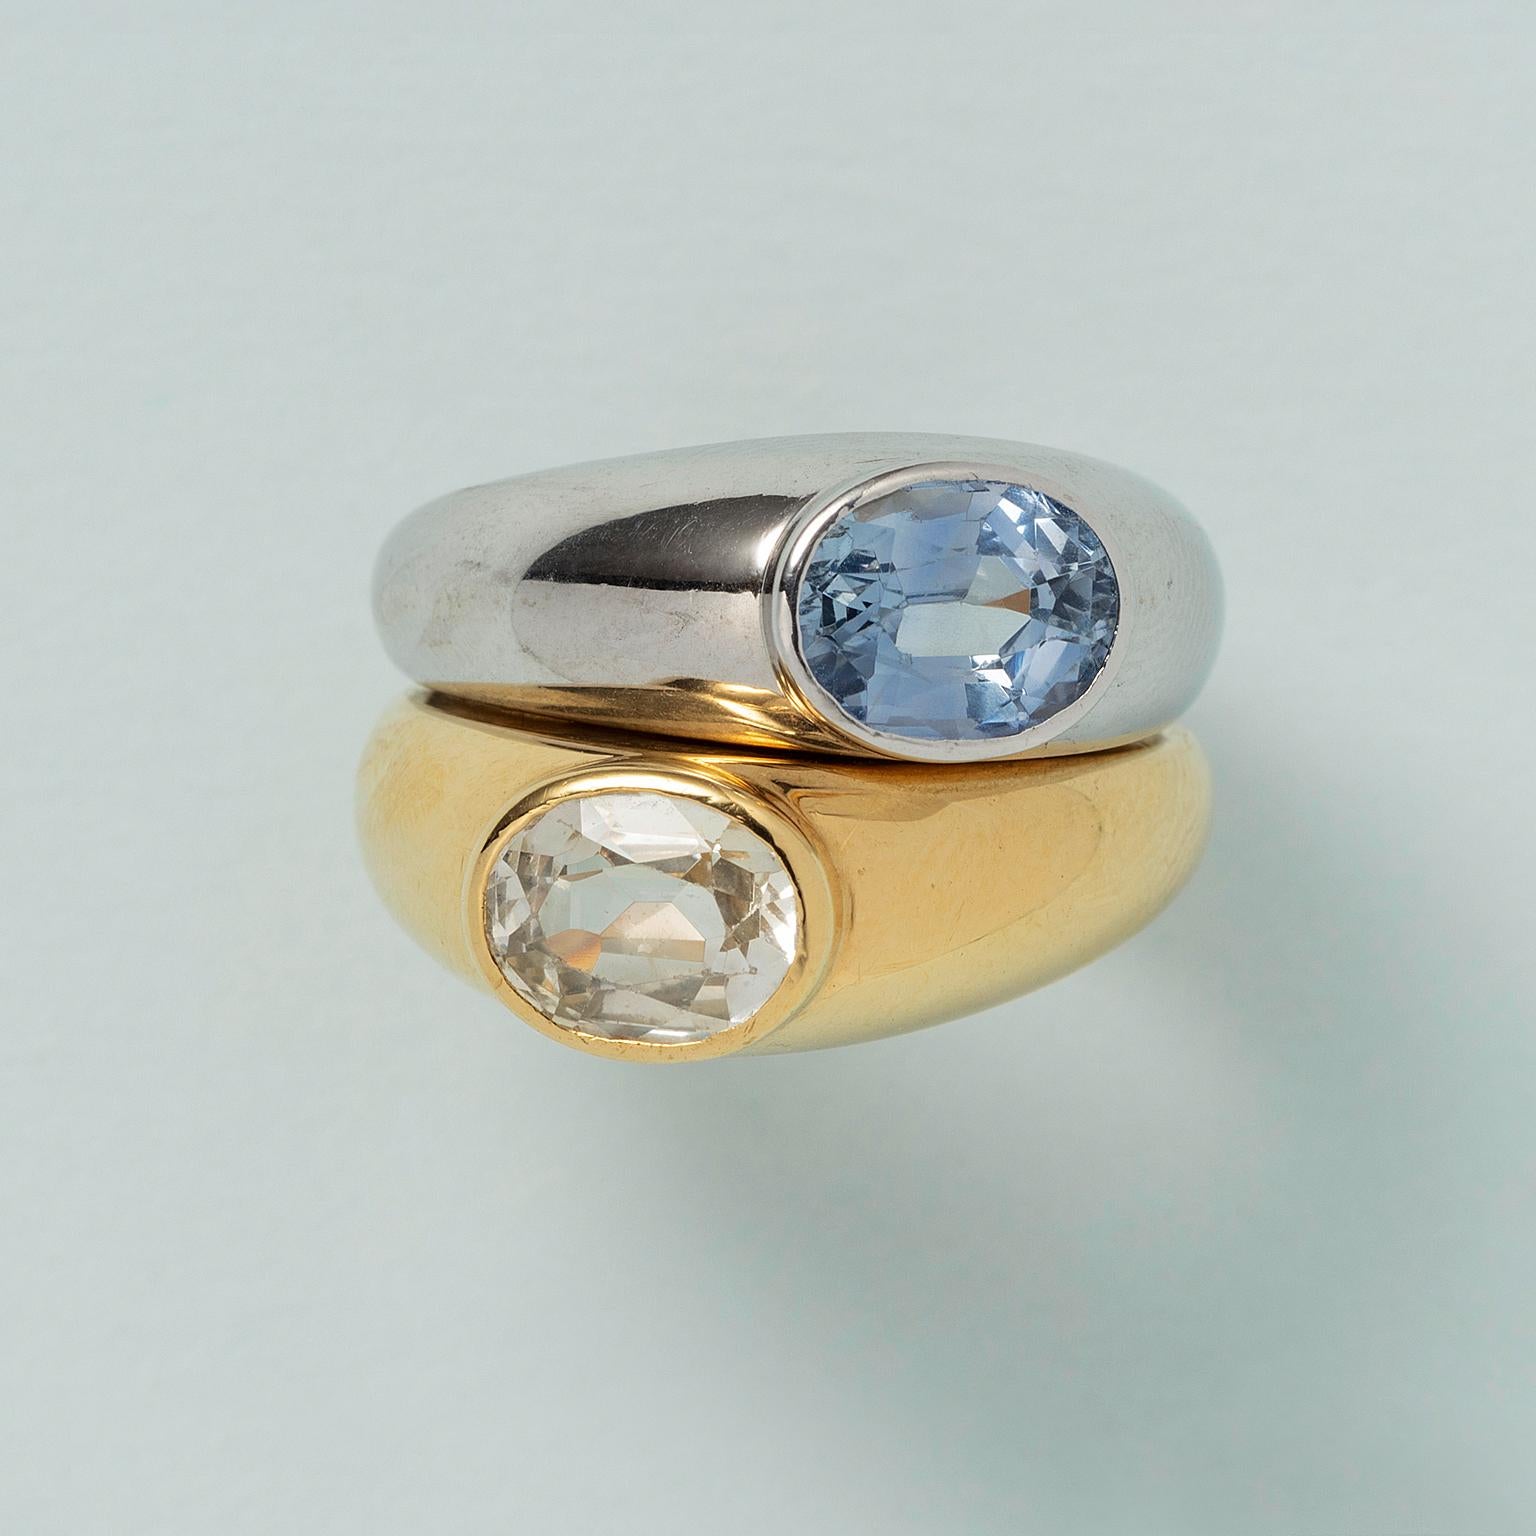 Oval Cut An 18 carat Gold Poiry ring with sapphire